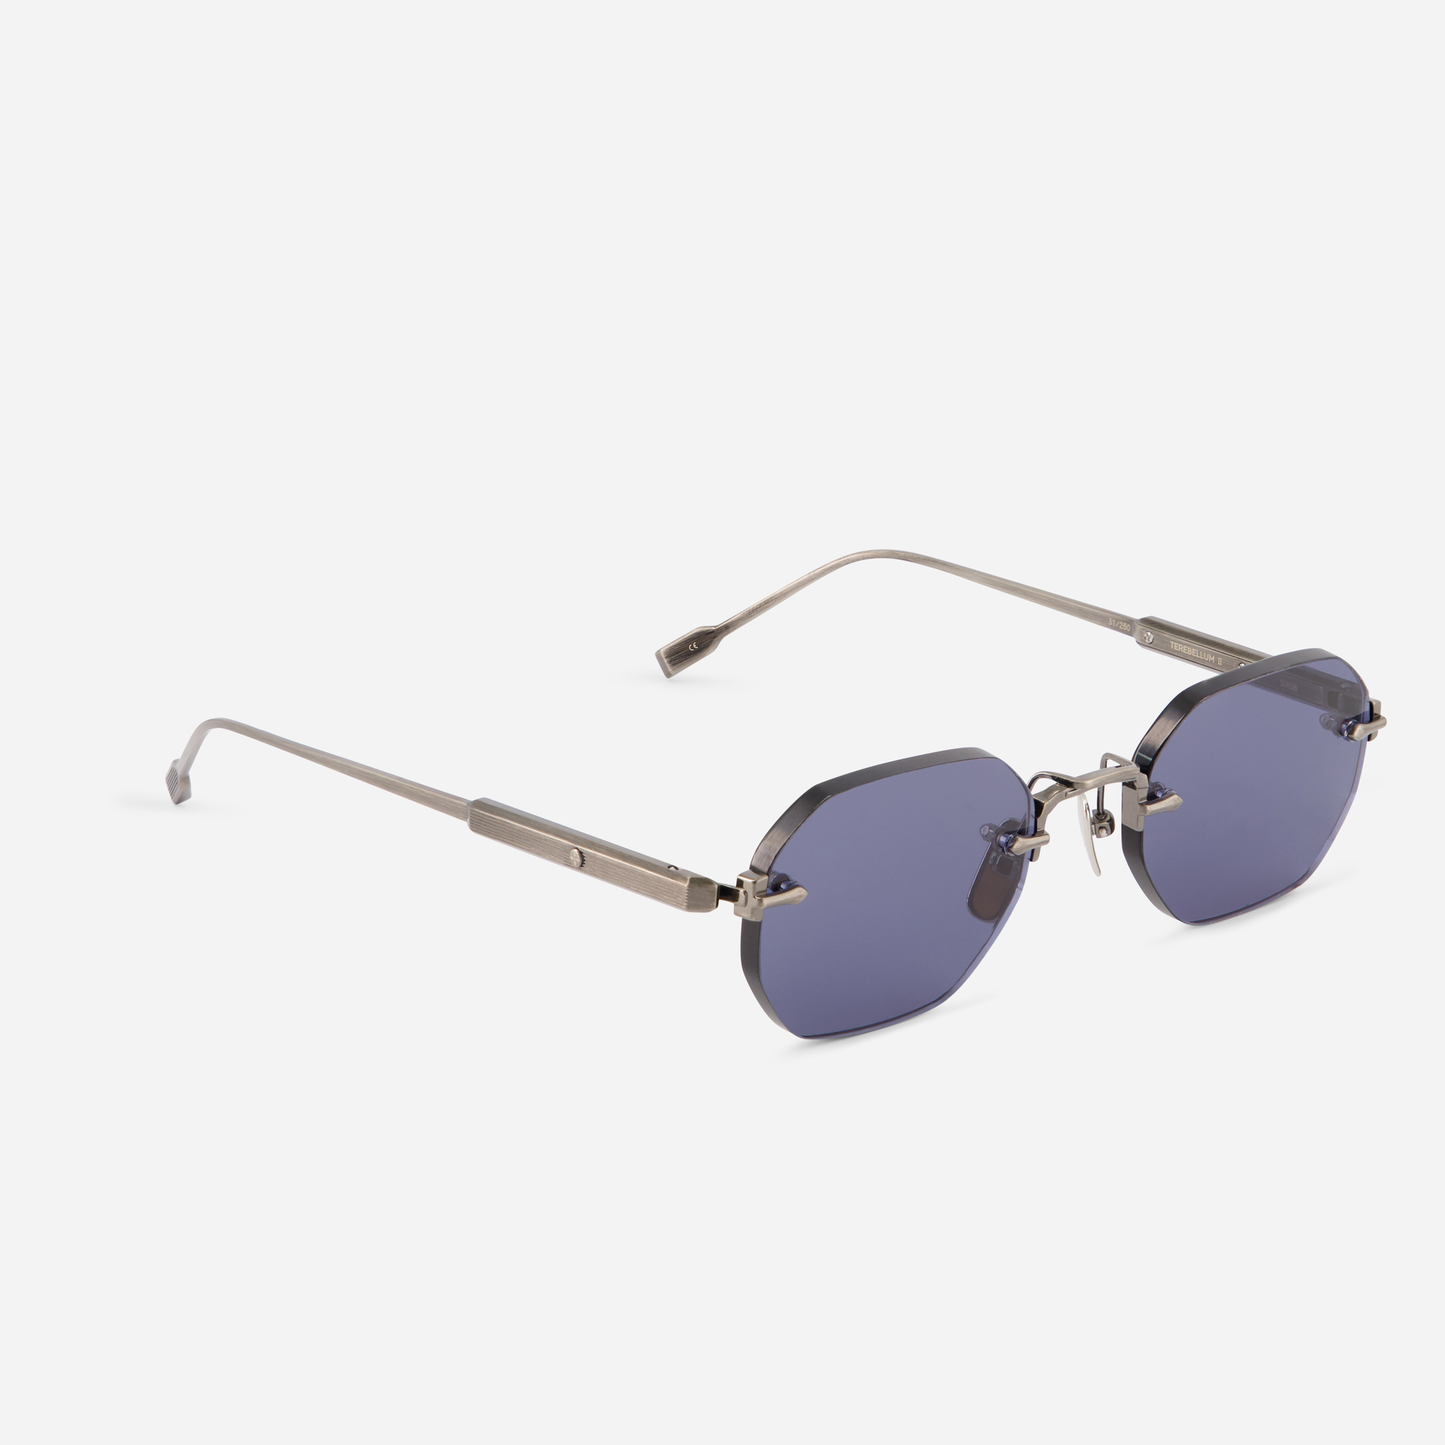 Terebellum II S708, with its Titanium frame, antique silver coating, and striking BL16 blue lenses